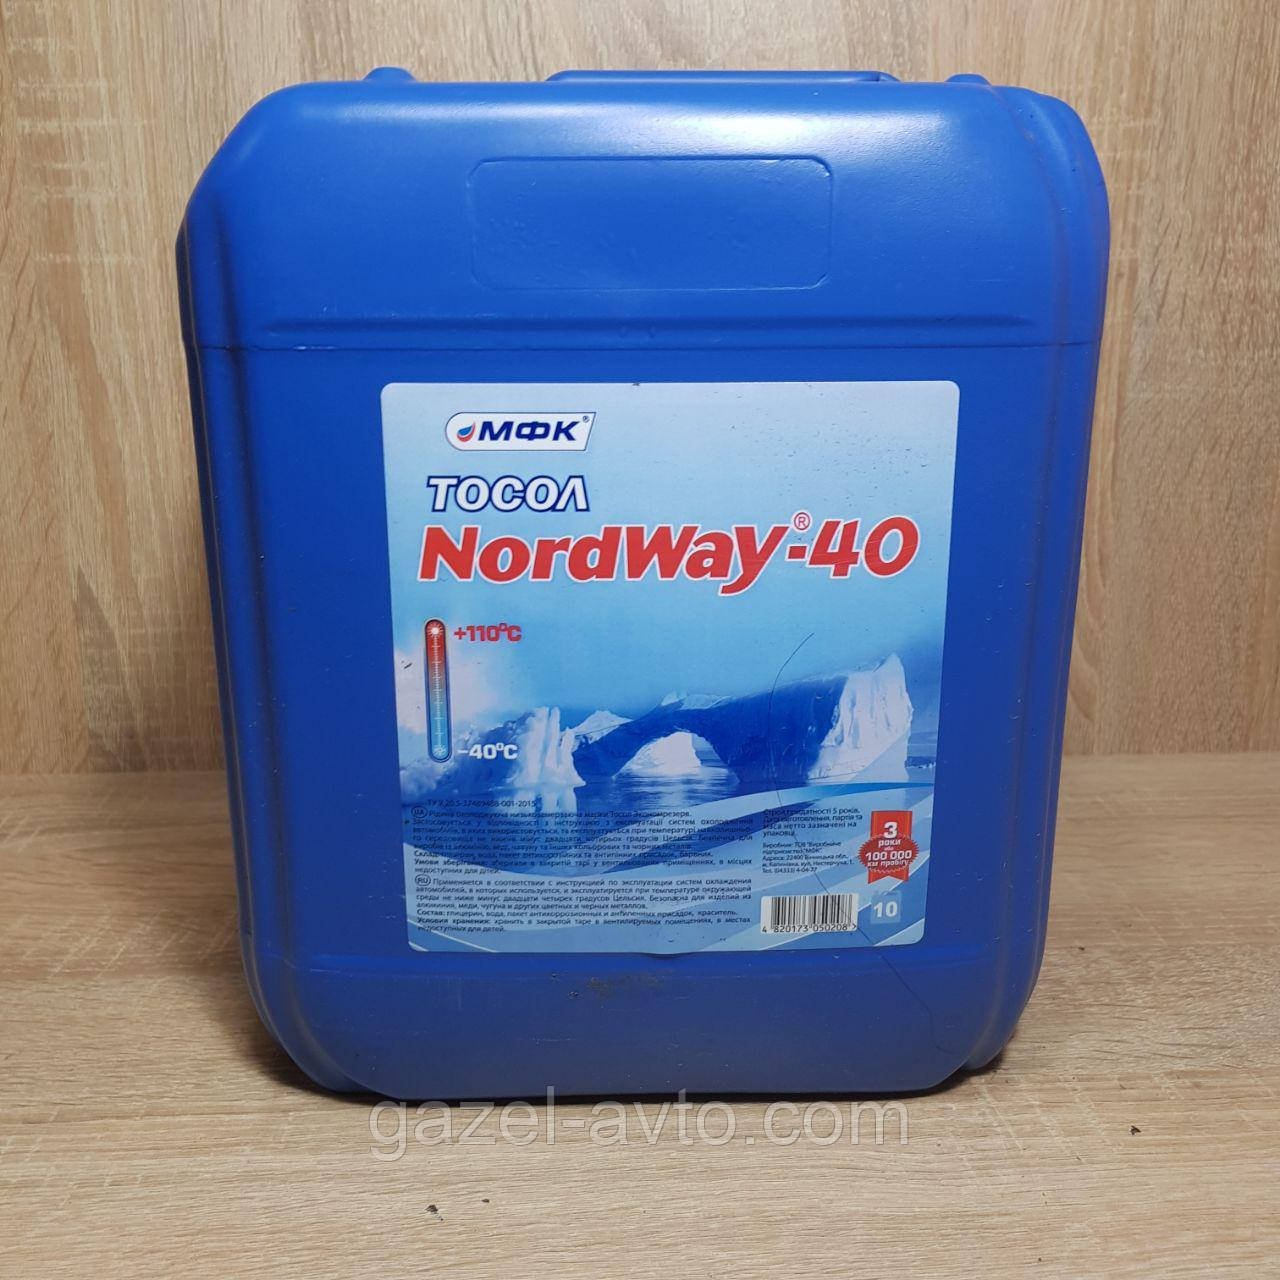 NORDWAY Тосол-40, 8.9 кг